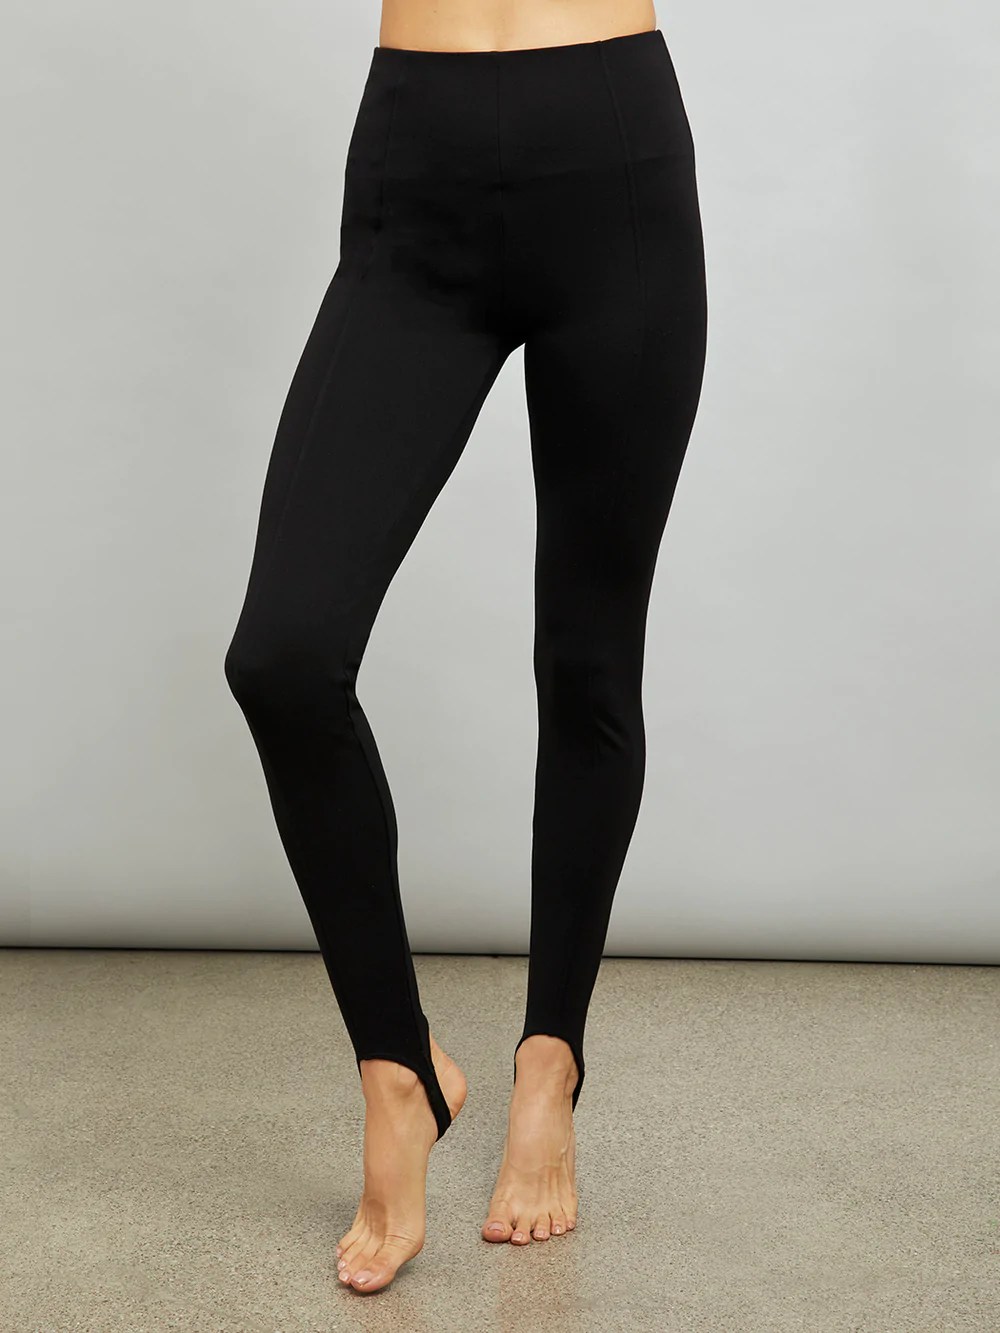 pointe stirrup legging from carbon38 in black